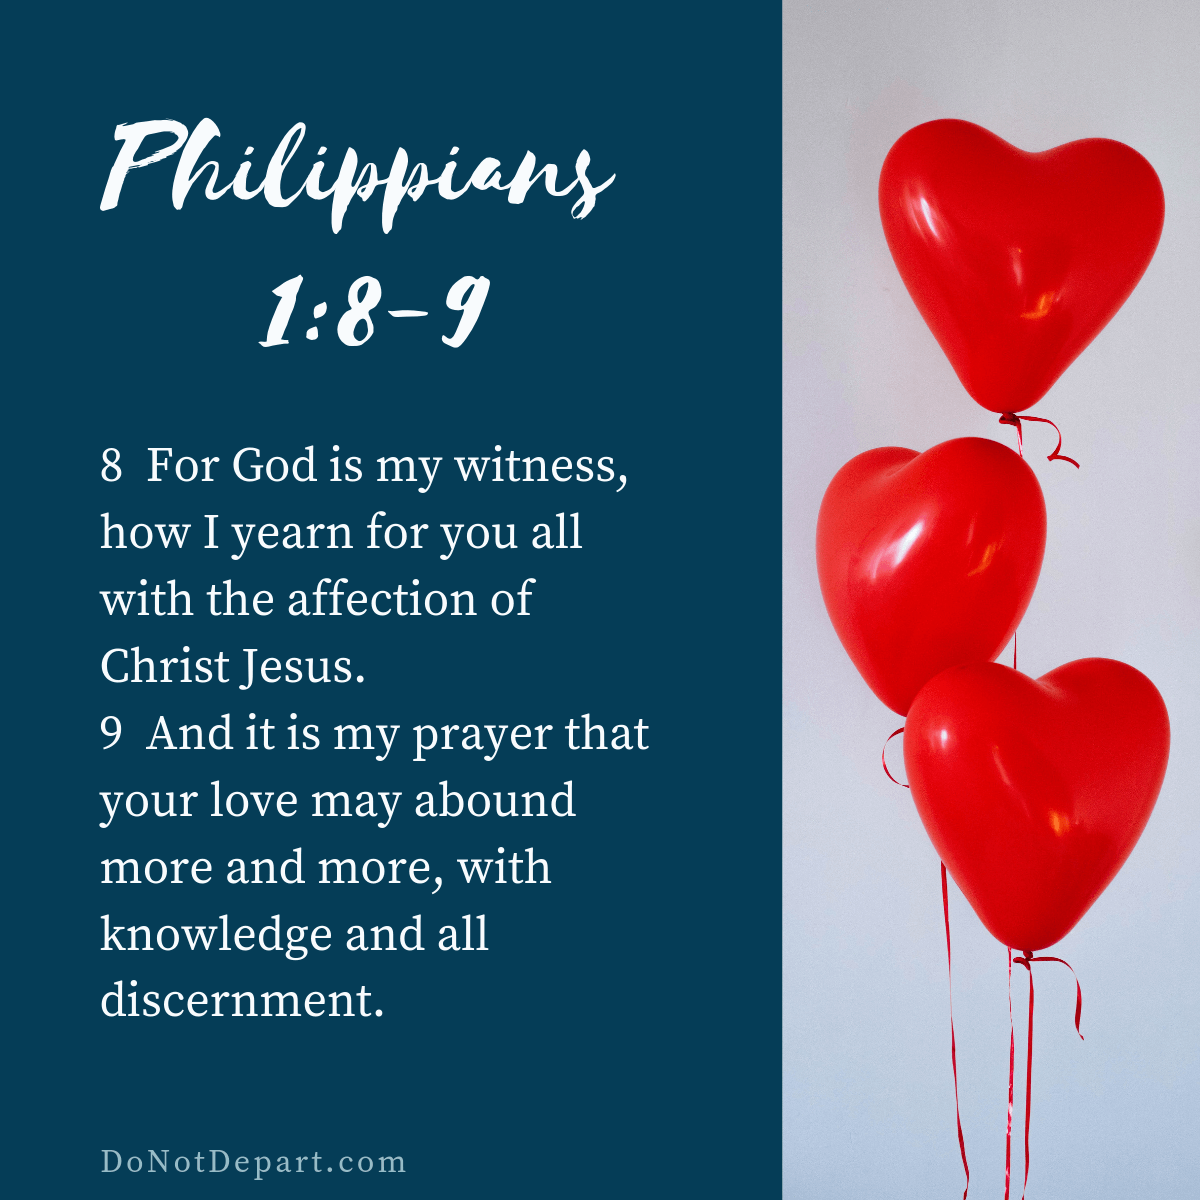 Here’s What to Pray for Your Friends – {Memorize Philippians 1:8-9}